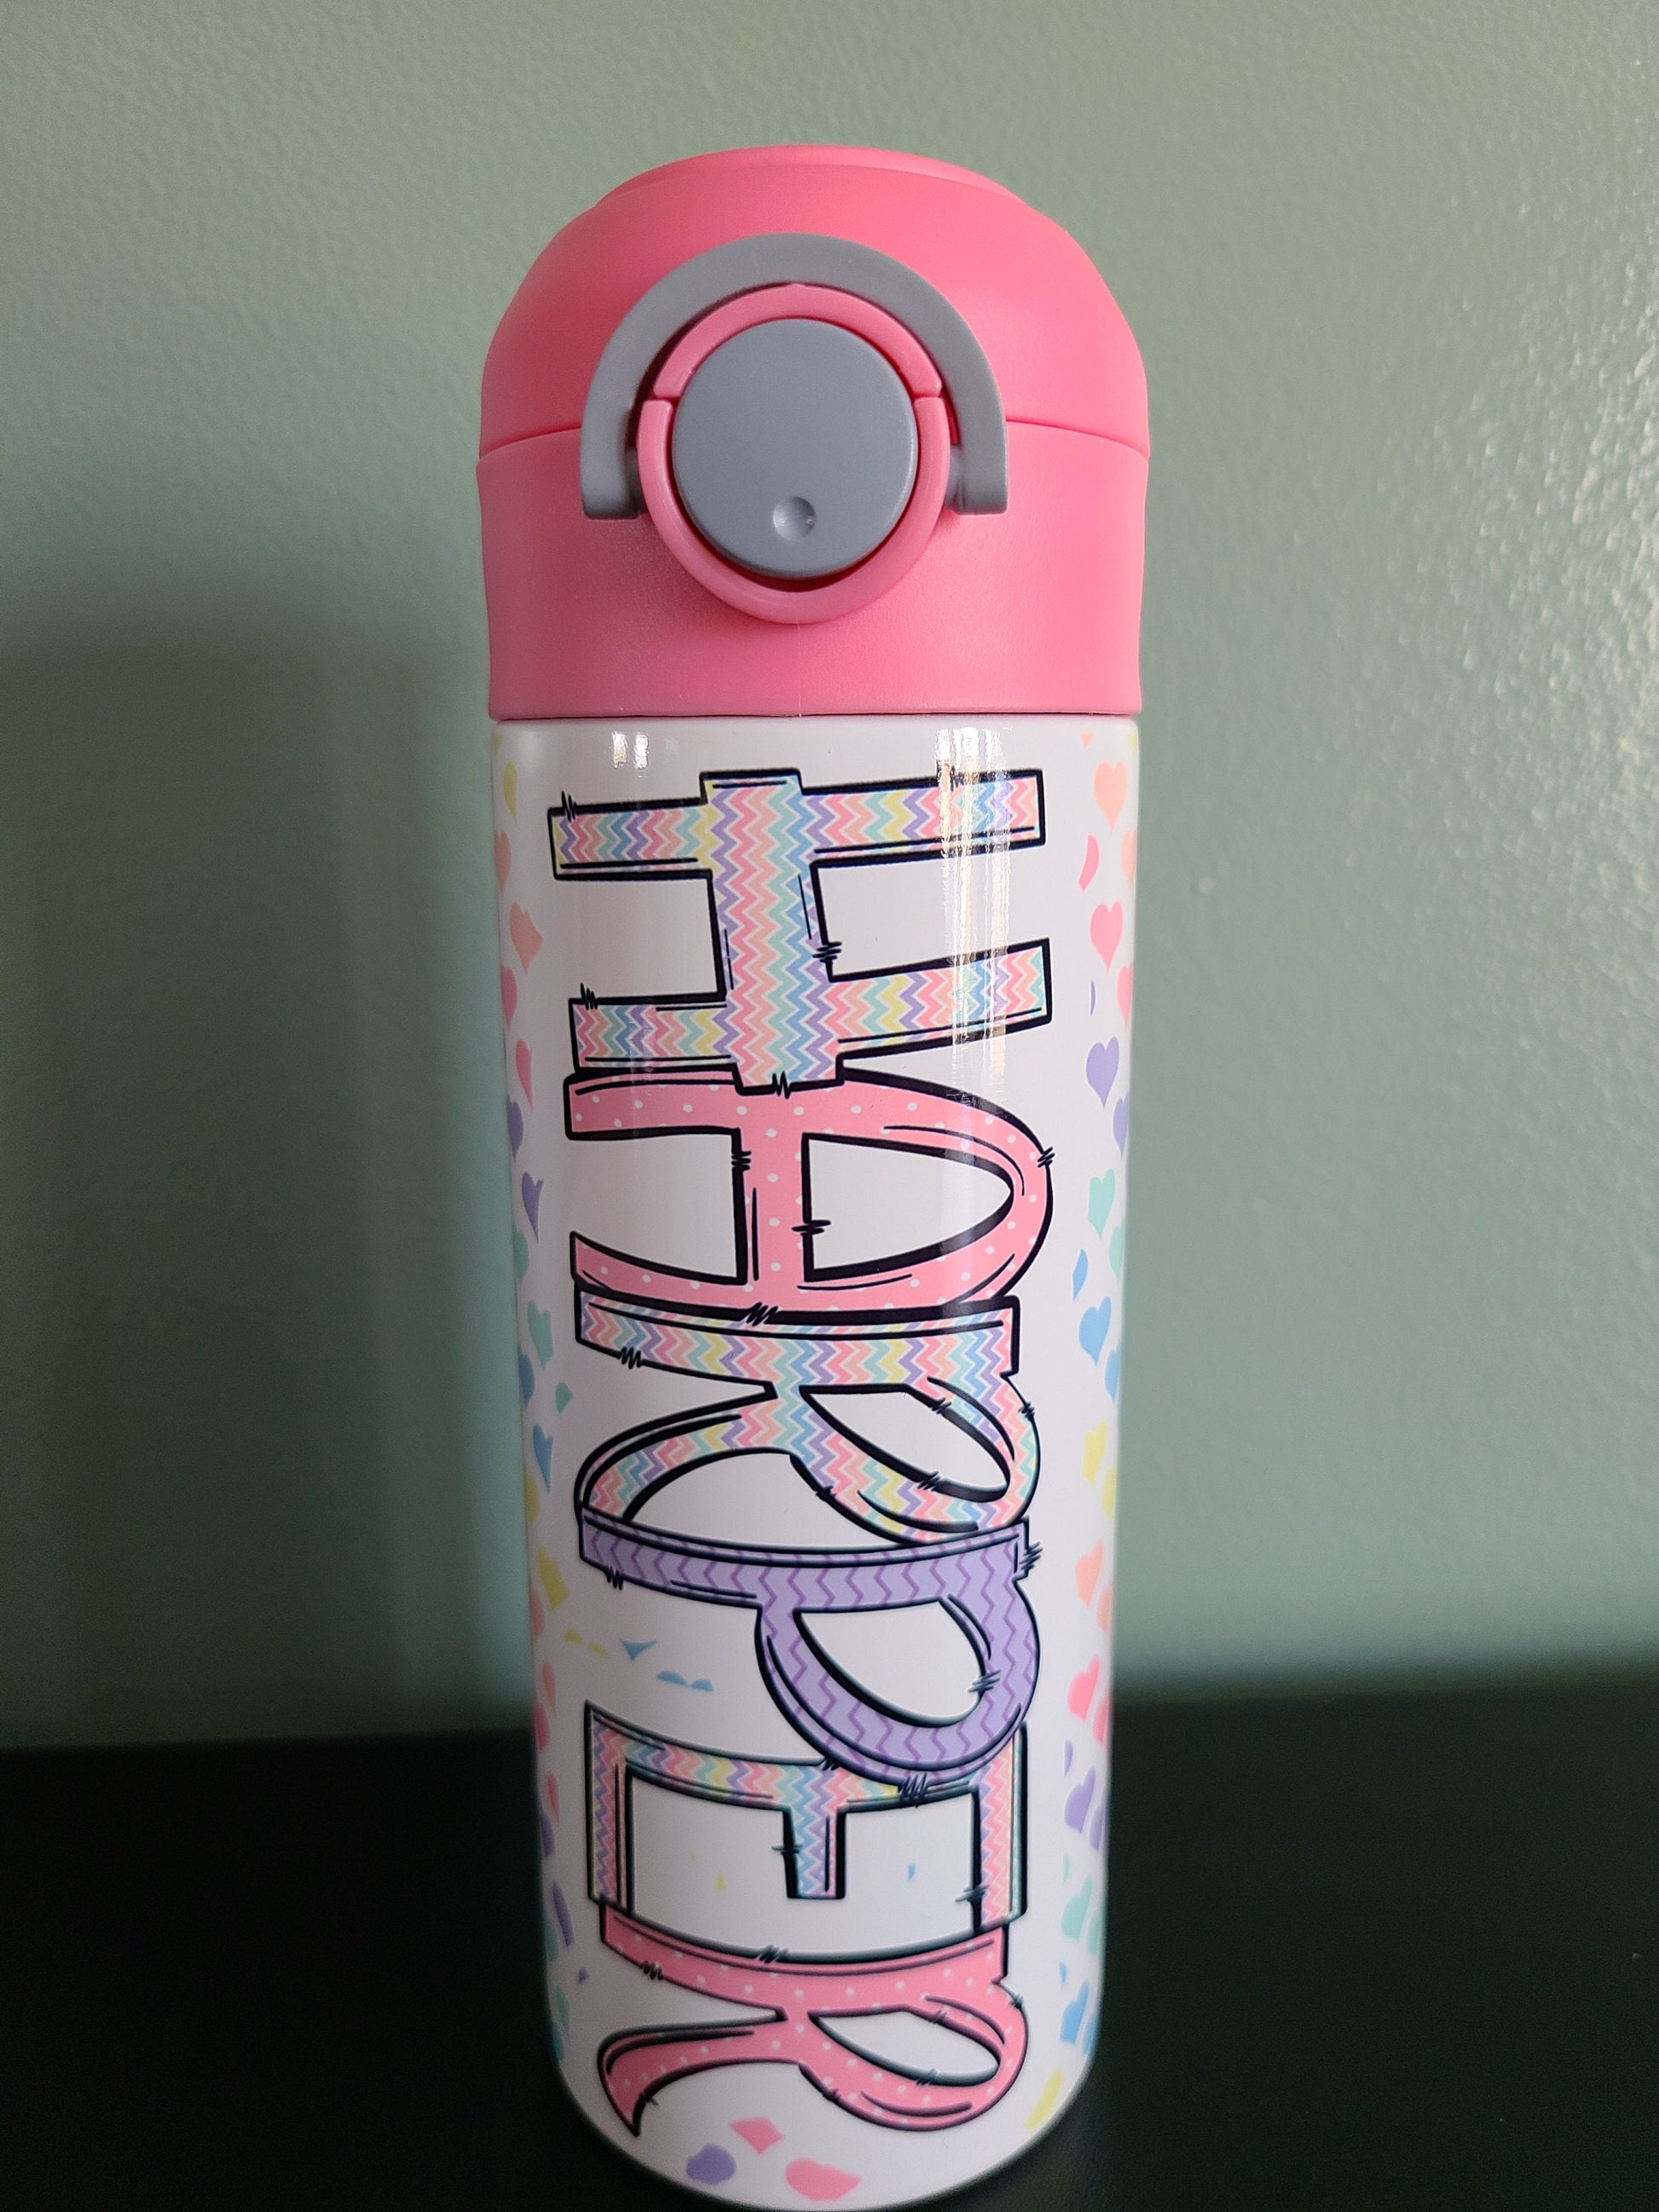 Personalized Water Bottle for Kids - Pink